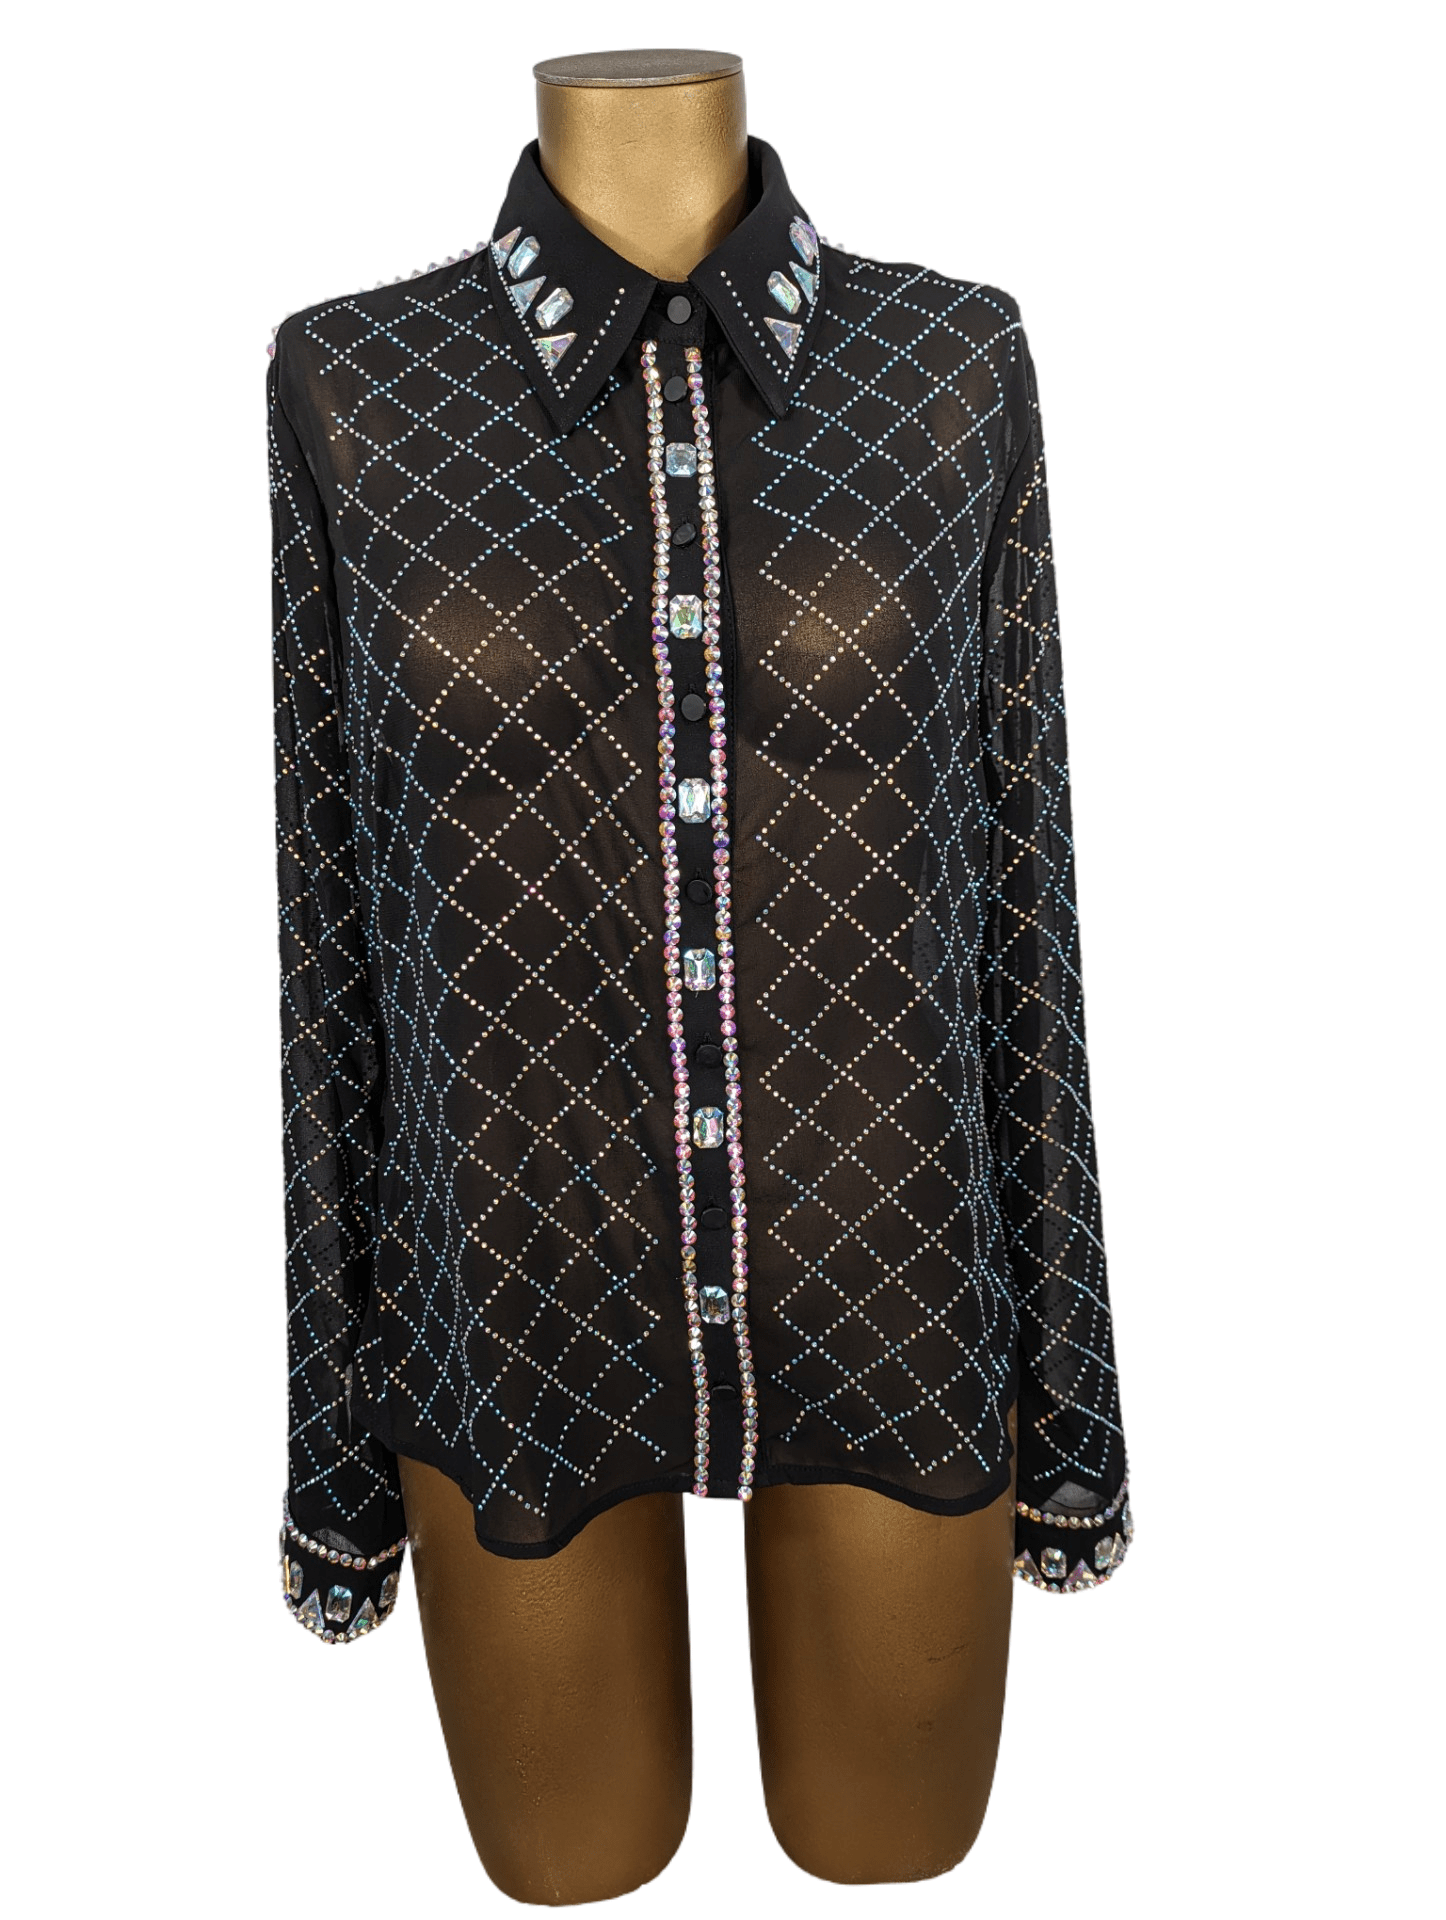 sparkle-ridge-womens-western-wear-affordable-show-clothes-horse-shirts-with-bling-rodeo-bodysuit-black-diamond-glitz-front.png (Copy)